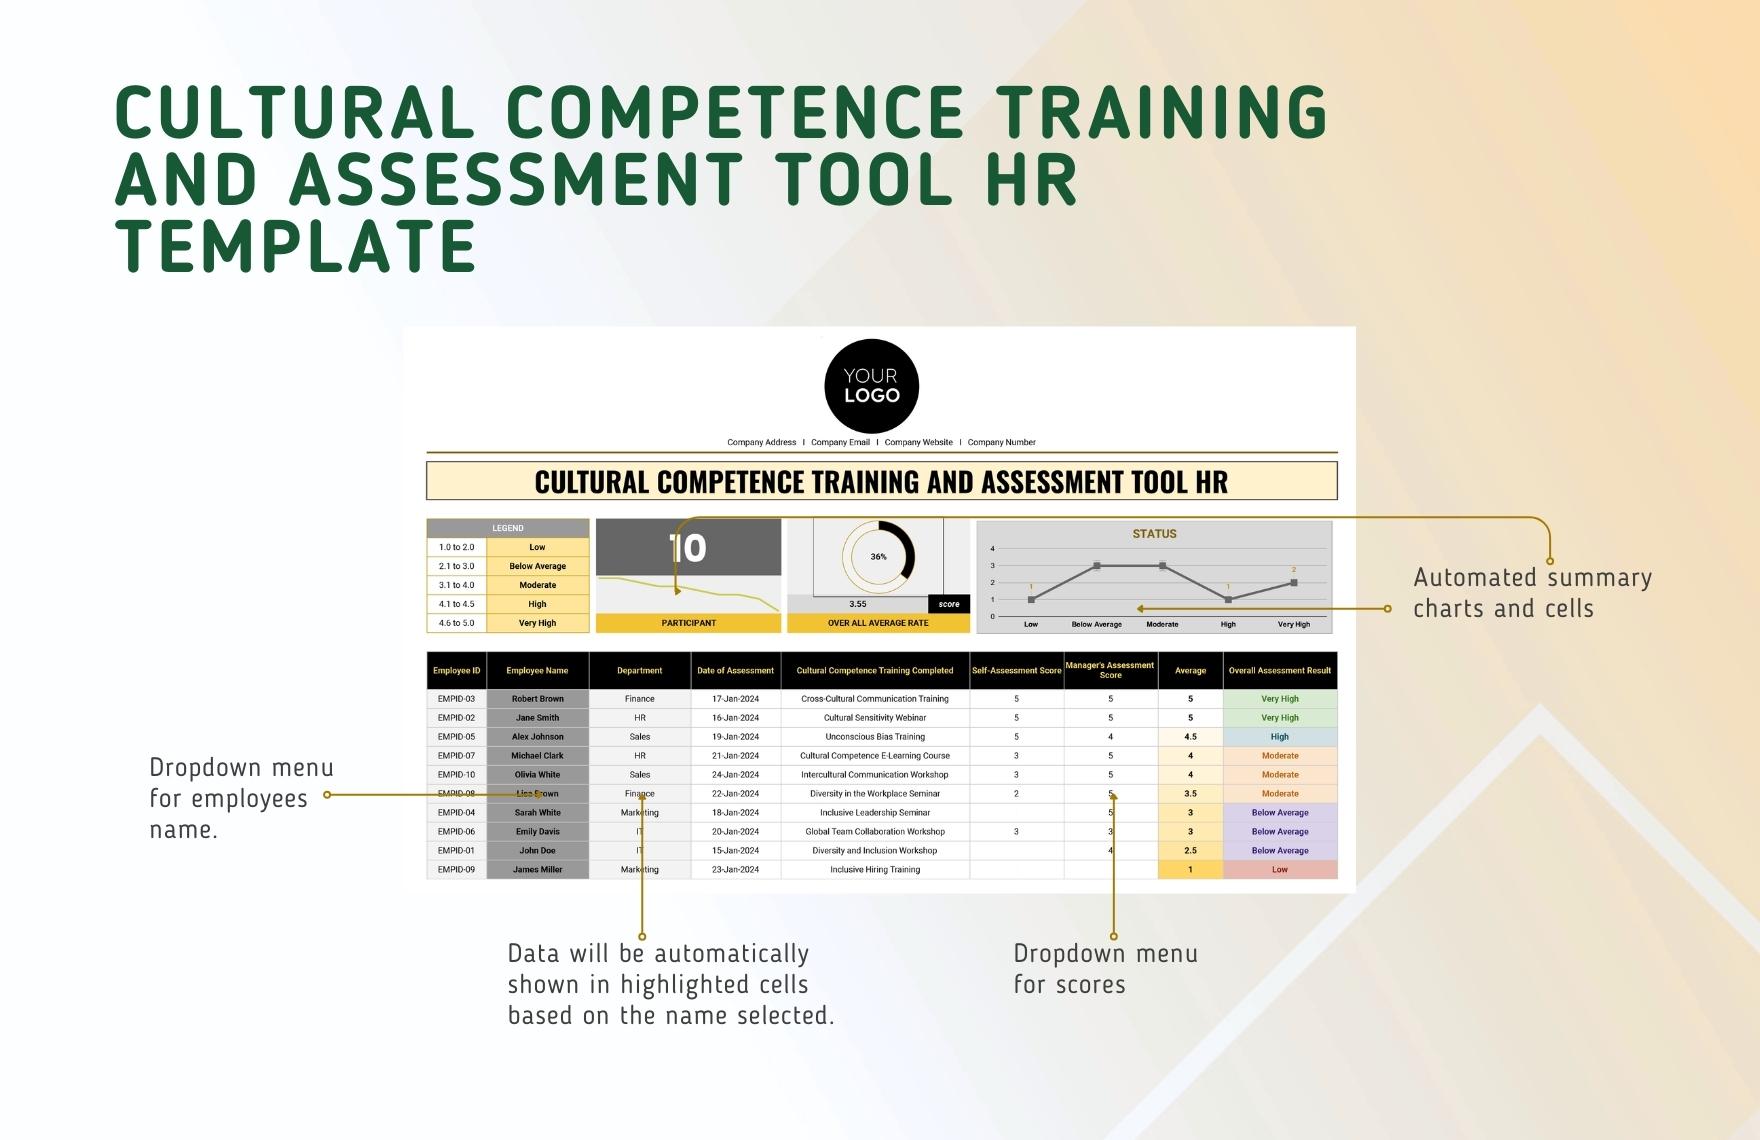 Cultural Competence Training and Assessment Tool HR Template